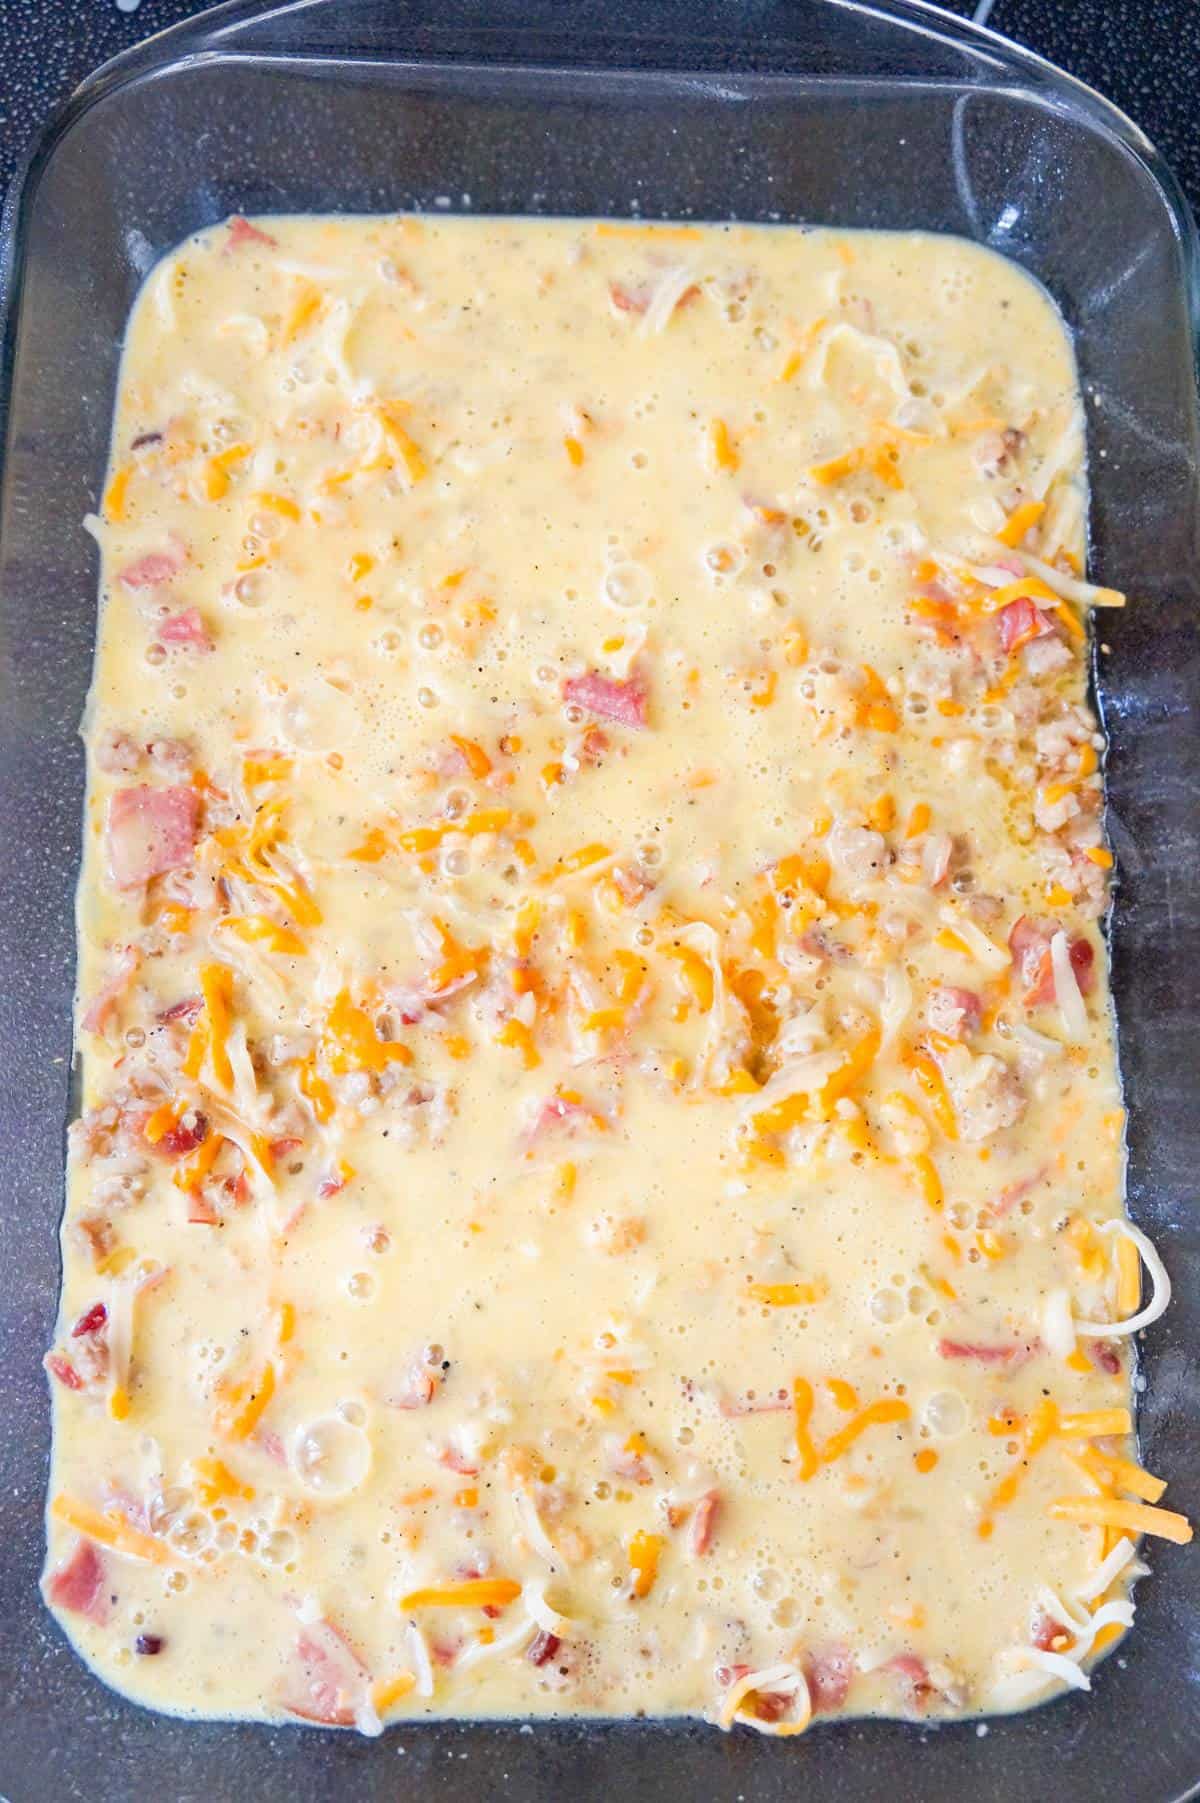 egg and meat mixture in a baking dish